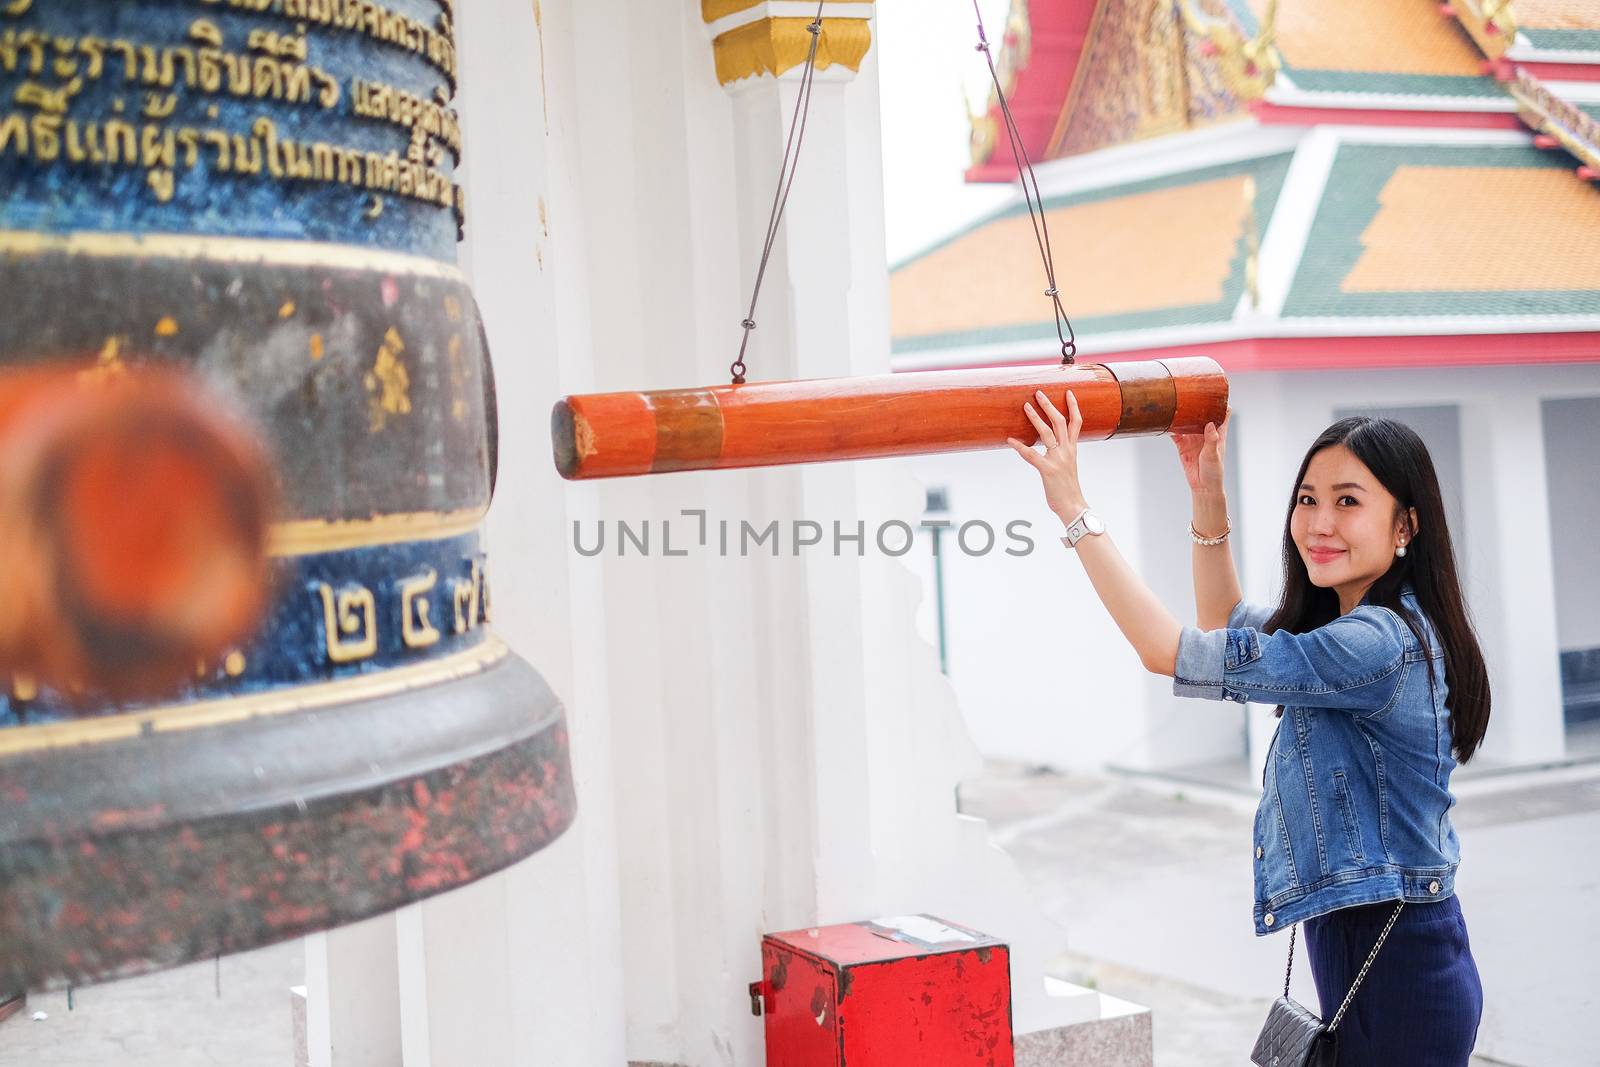 Woman ringing a bell in a Buddhist temple in Thailand by Surasak